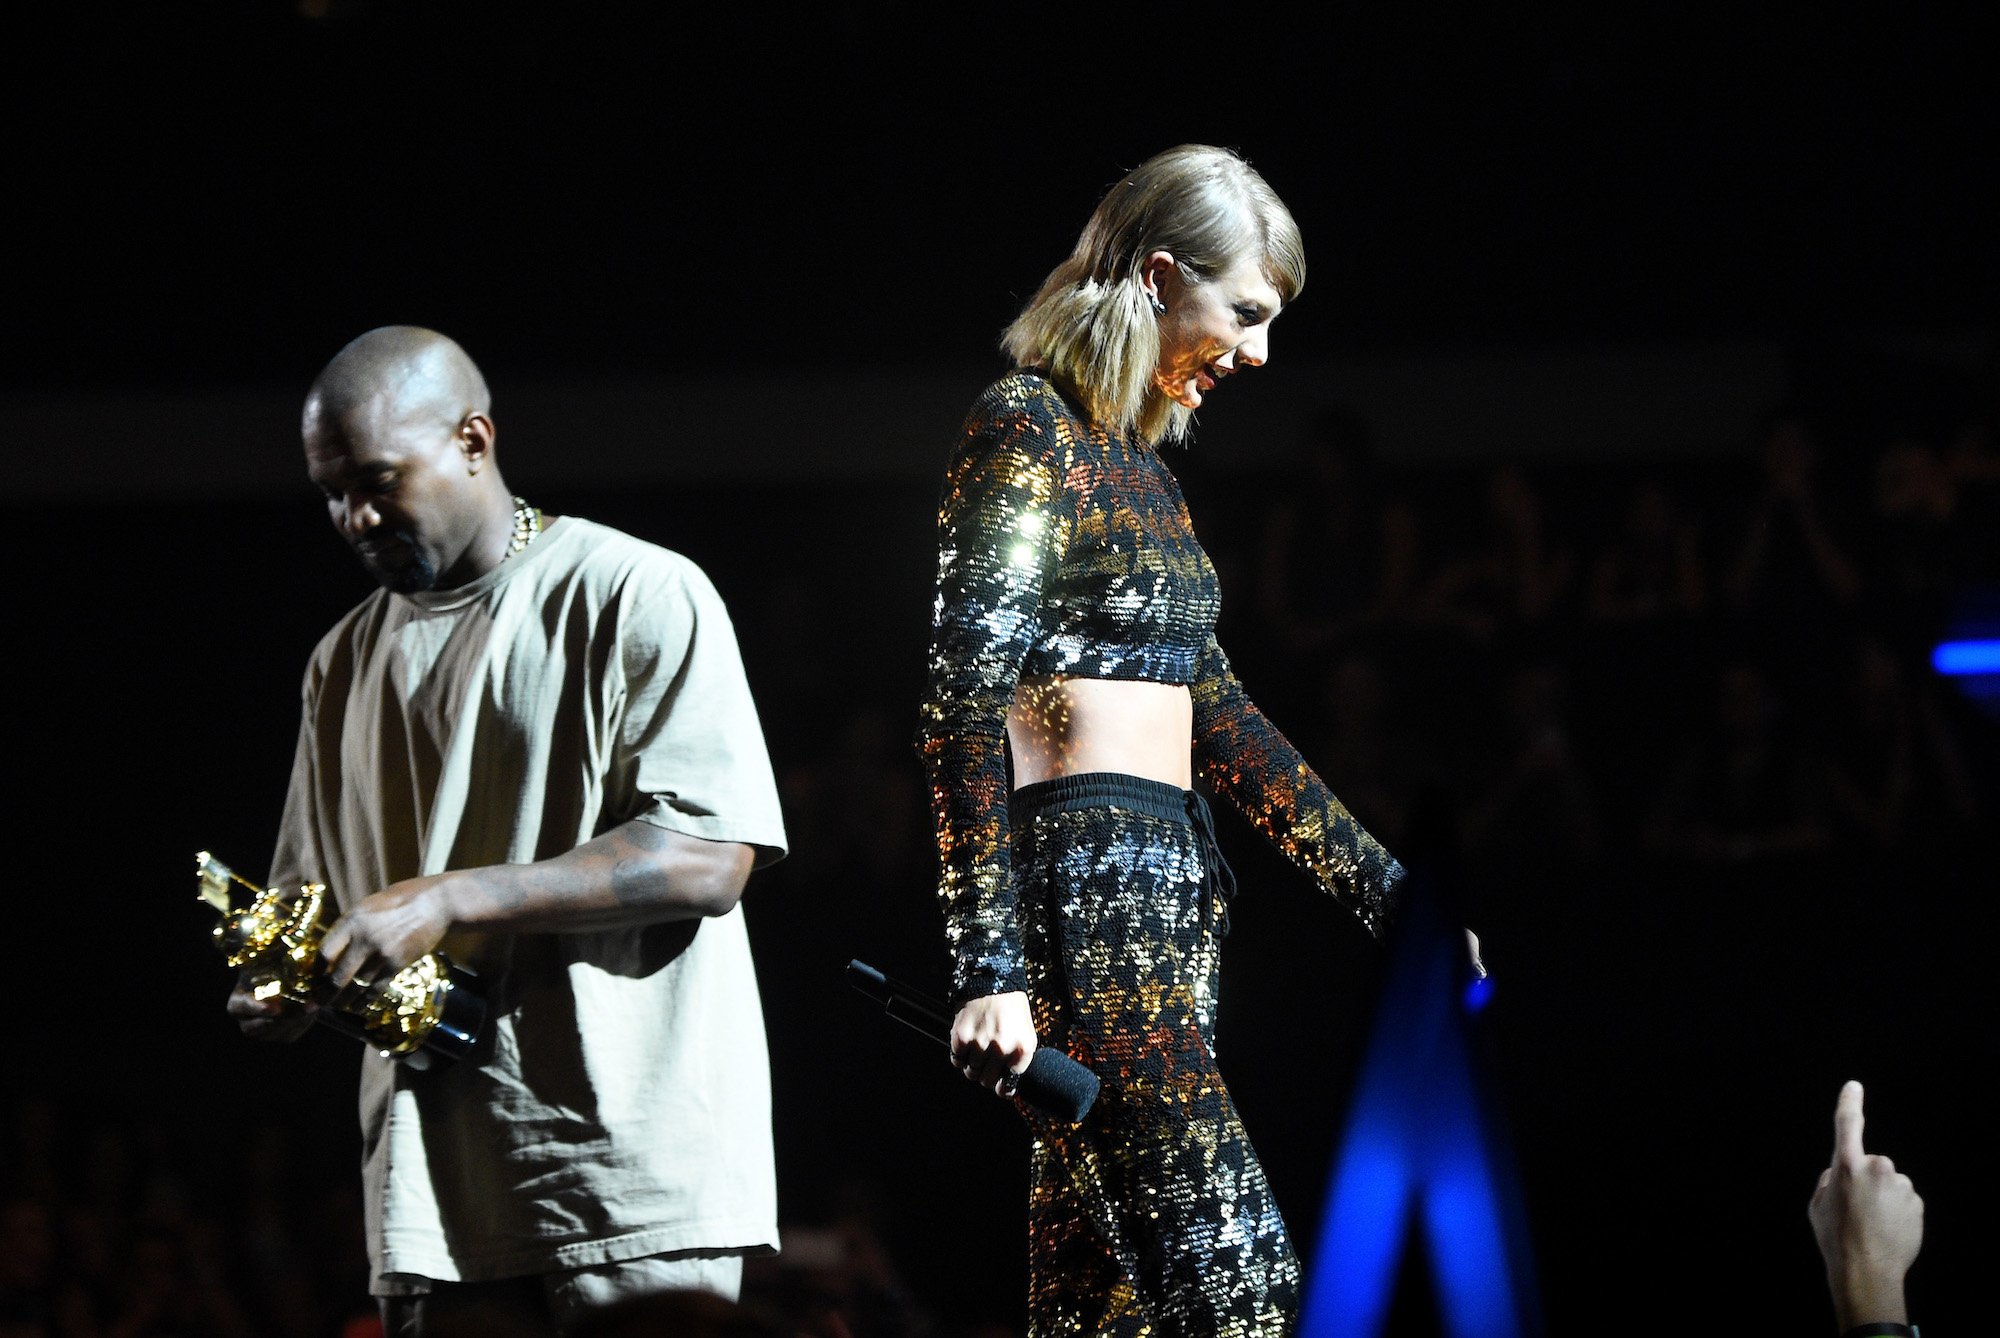 Kanye West accepts the Vanguard Award from recording artist Taylor Swift onstage during the 2015 MTV Video Music Awards.